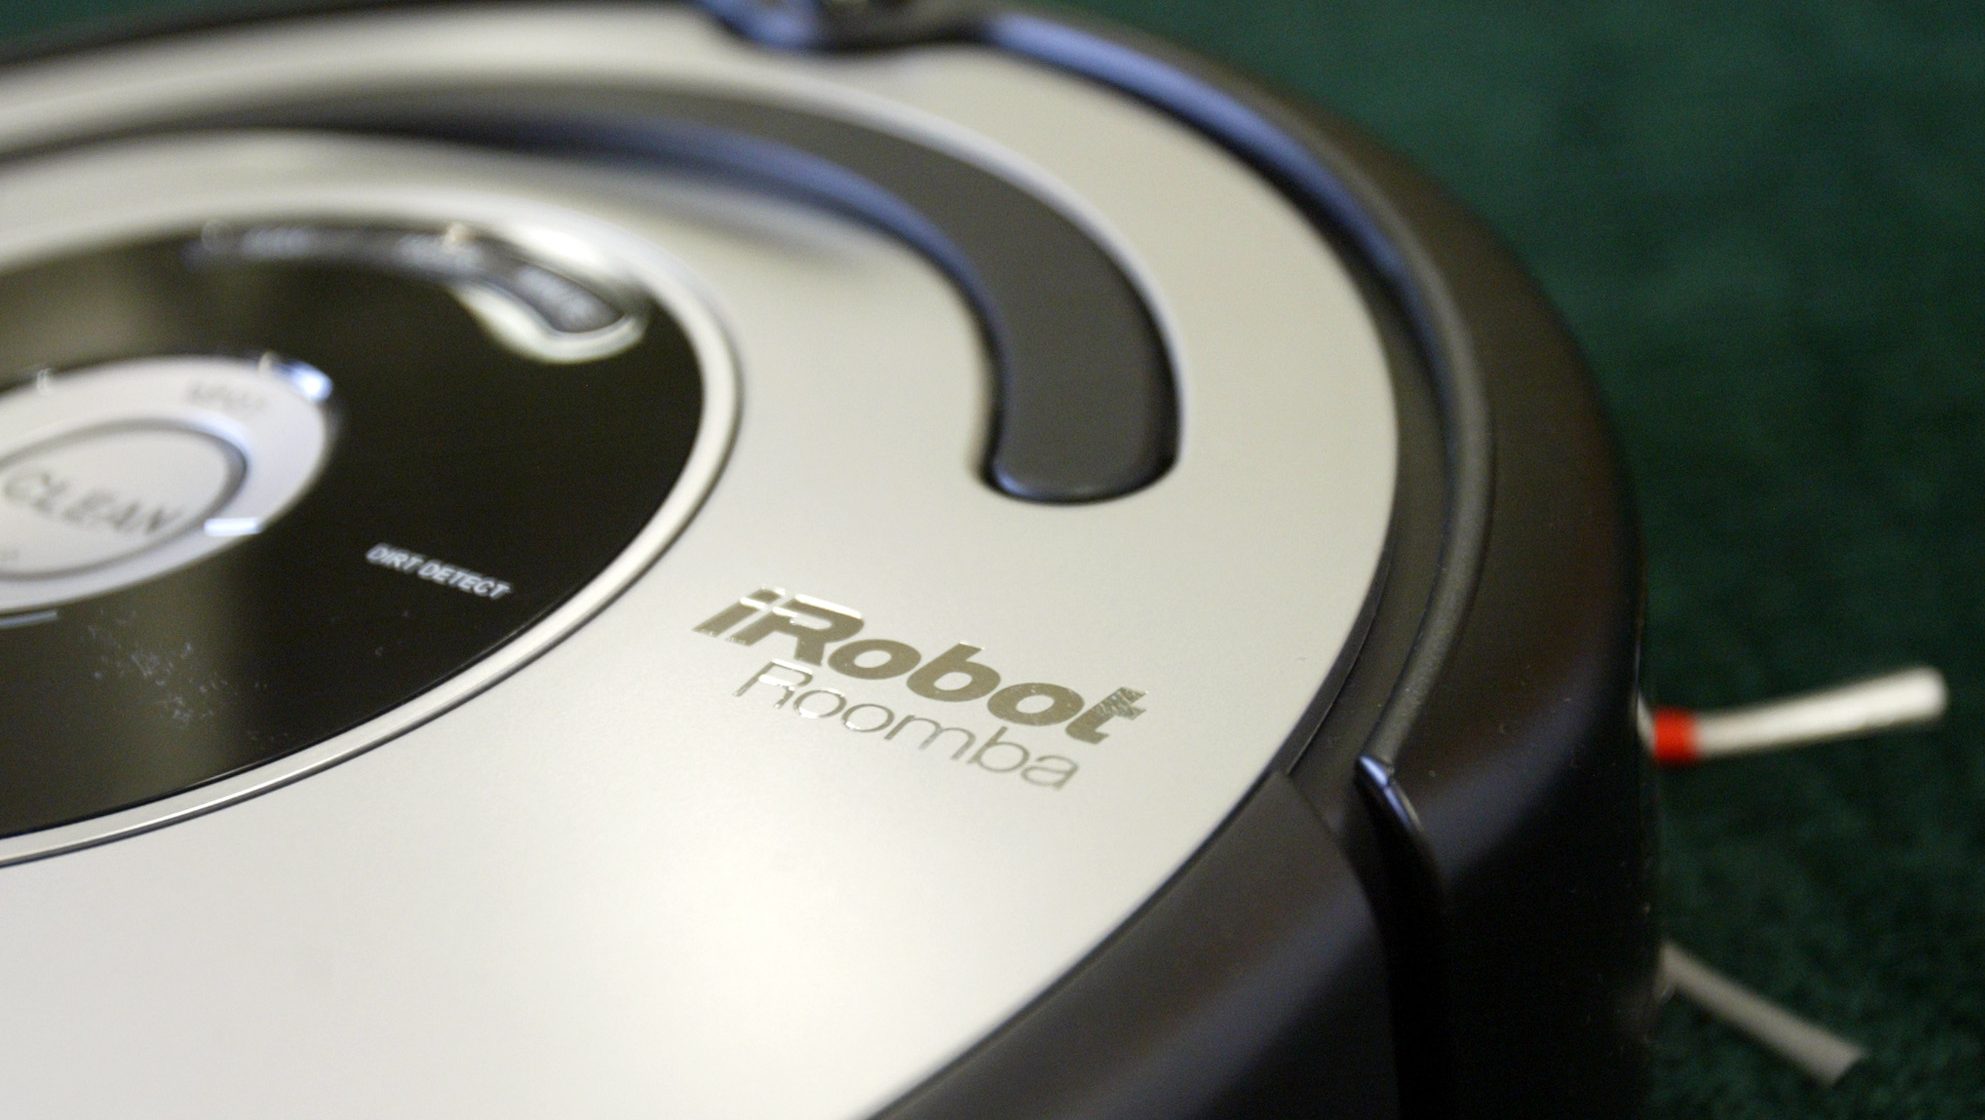 lowers price for Roomba maker iRobot after deal faces